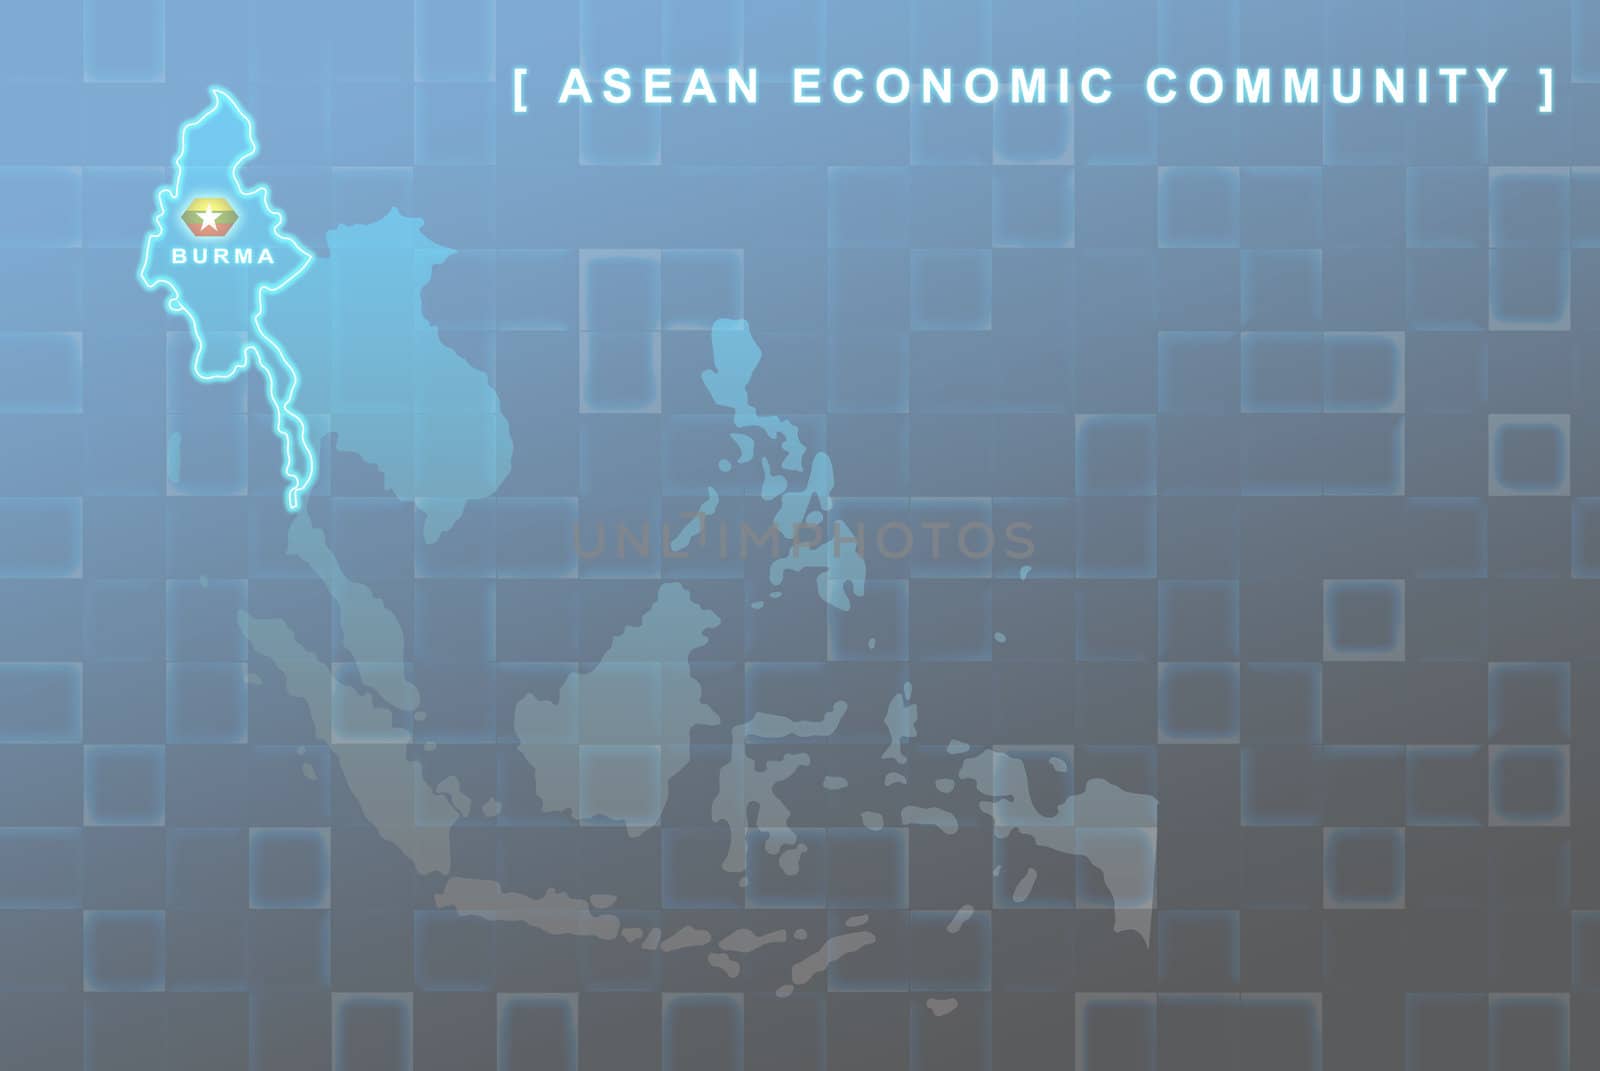 Modern map of South East Asia countries that will be member of AEC with Burma flag symbol in background